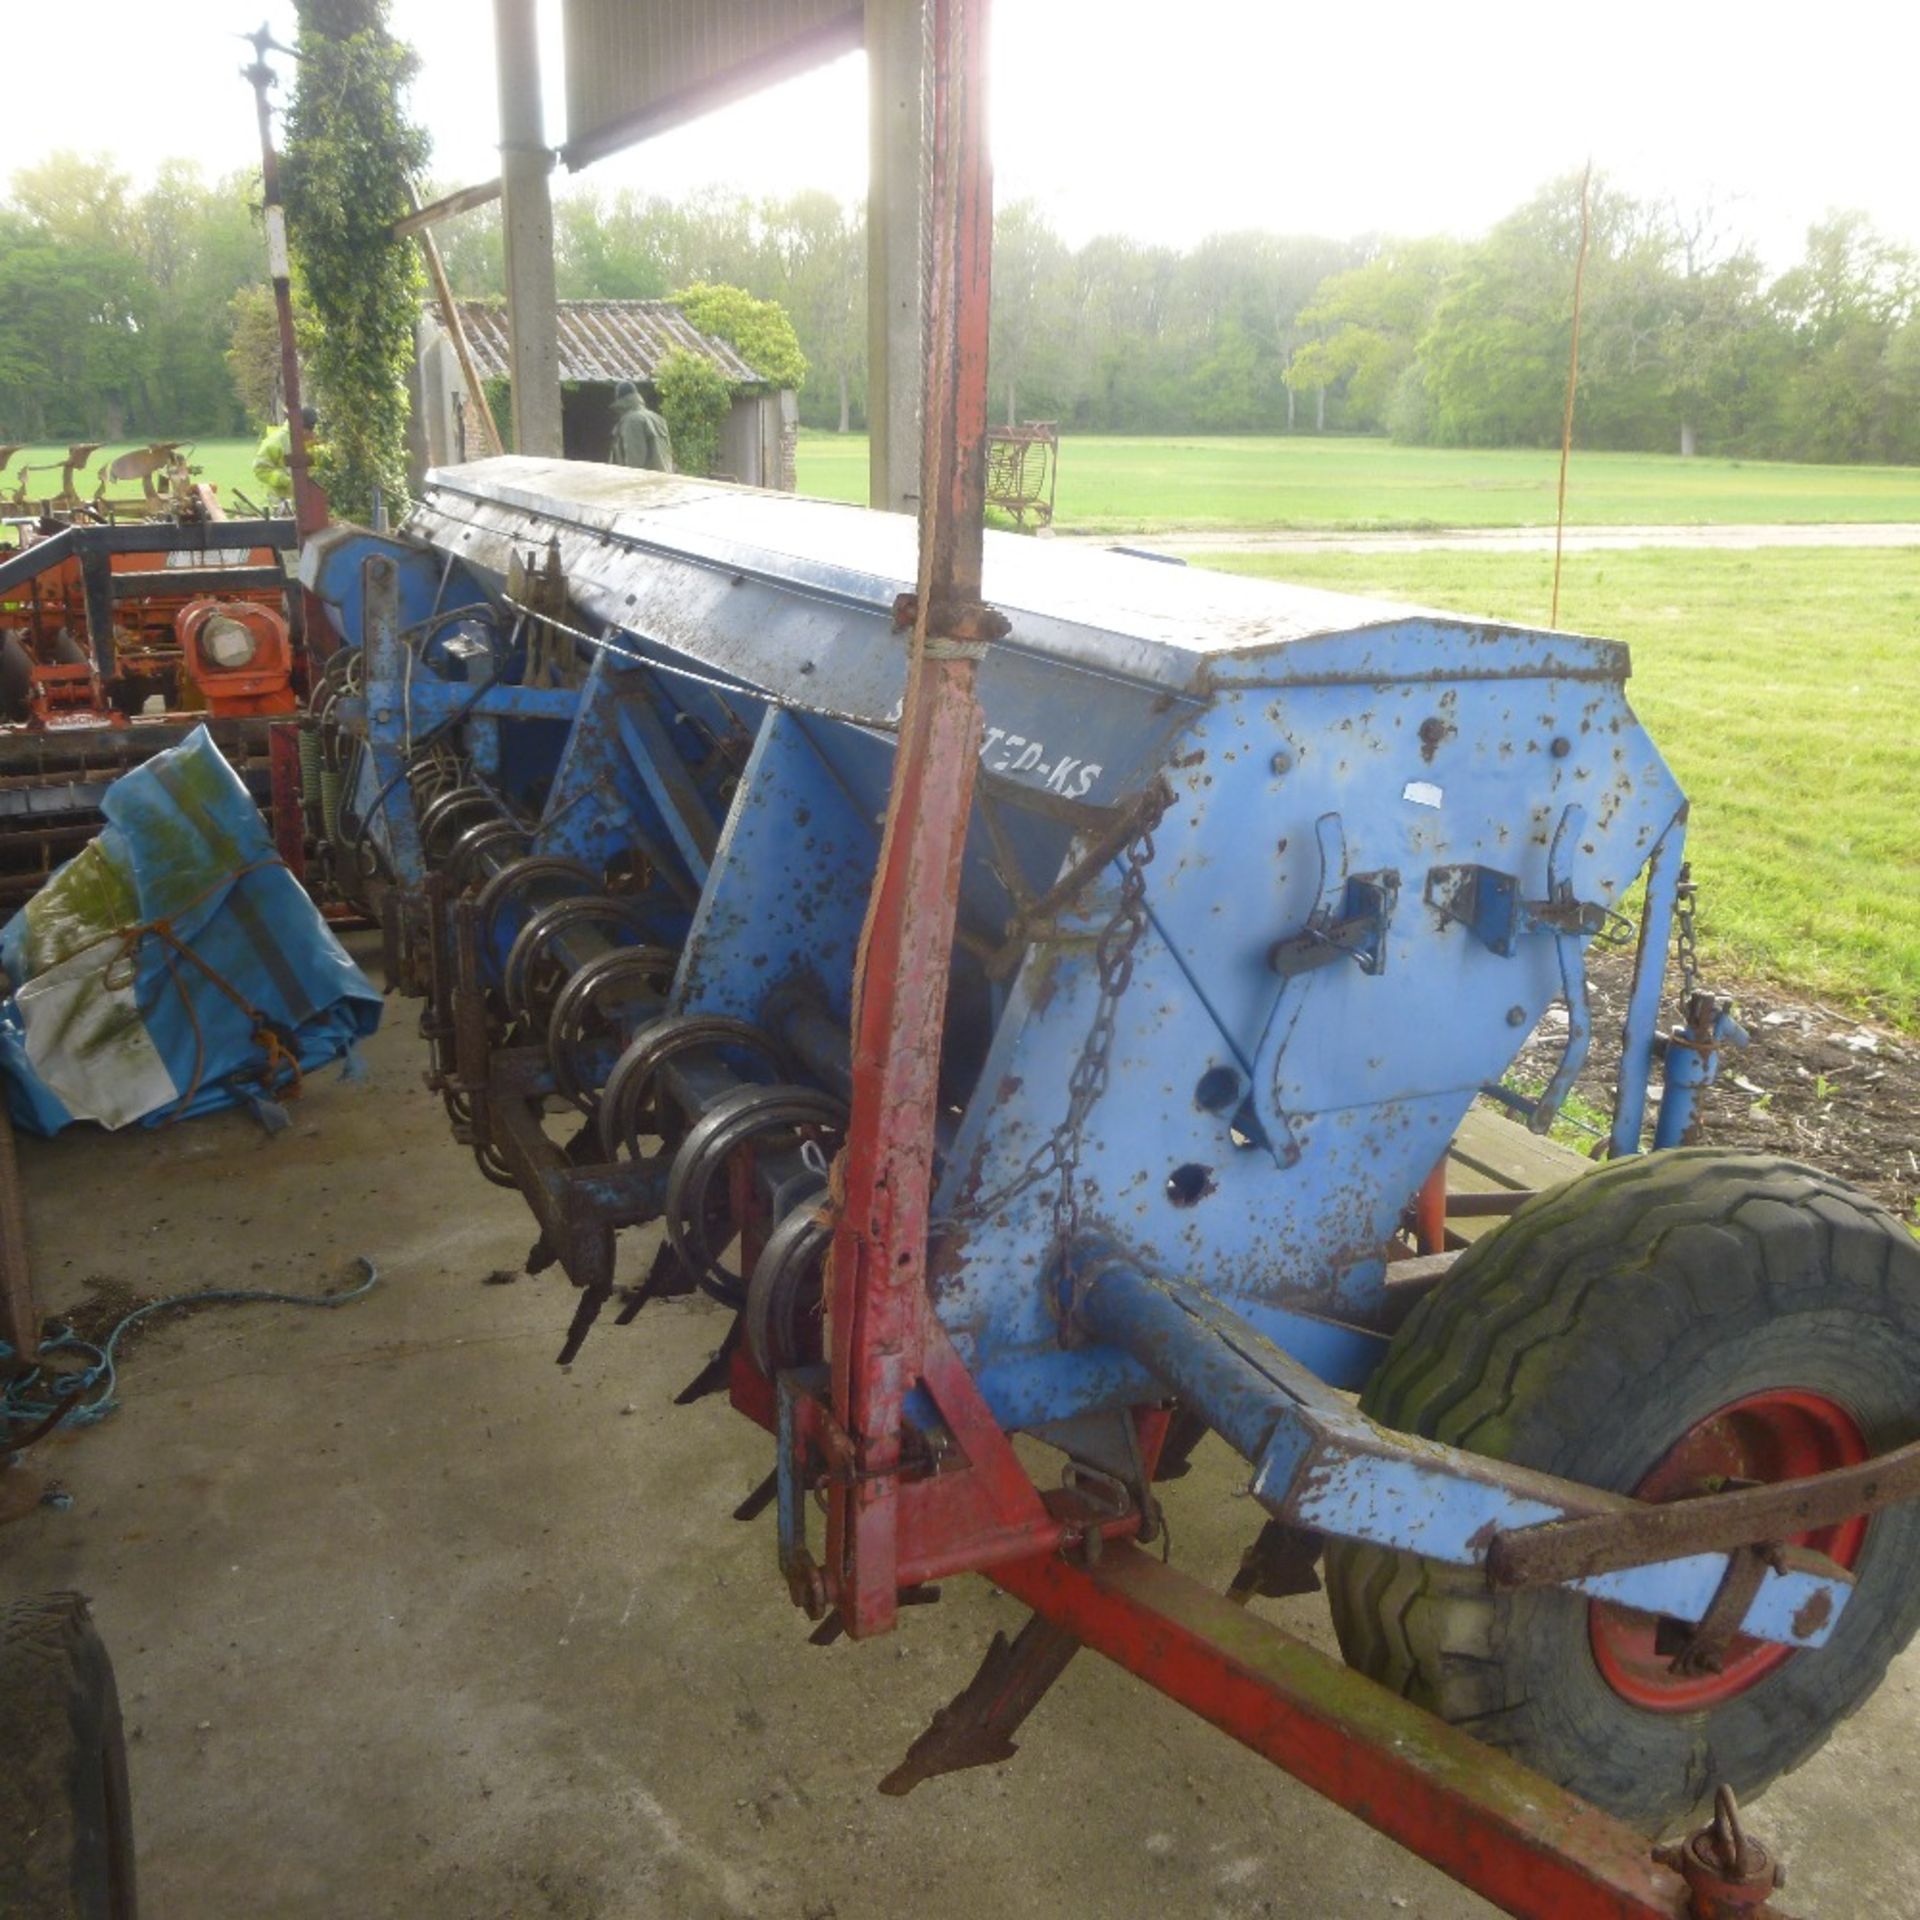 Stegsted 4m 28R seed drill. Stored near Bungay, Suffolk. - Image 2 of 2